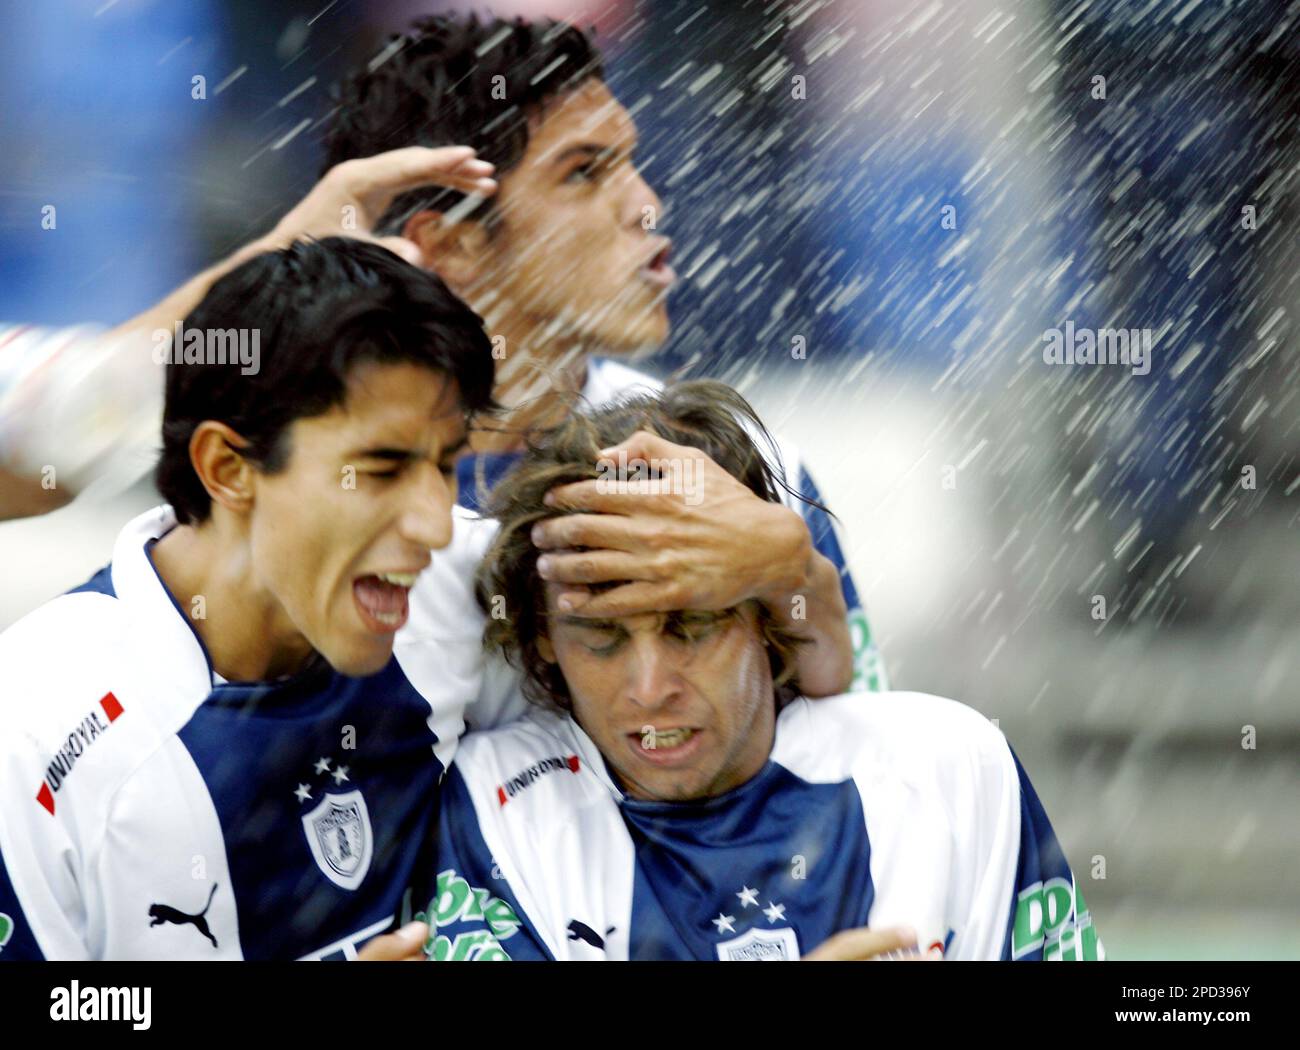 Pachuca's soccer player Richard Nunez, right, is congratulated by his teammates after Nunez scored a goal against Chivas' team at the Hidalgo stadium in Pachuca, Mexico, on Sunday May 14, 2006 during their Mexican league championship semi-final soccer match. ( AP Photo/ClaudioCruz) Stock Photo